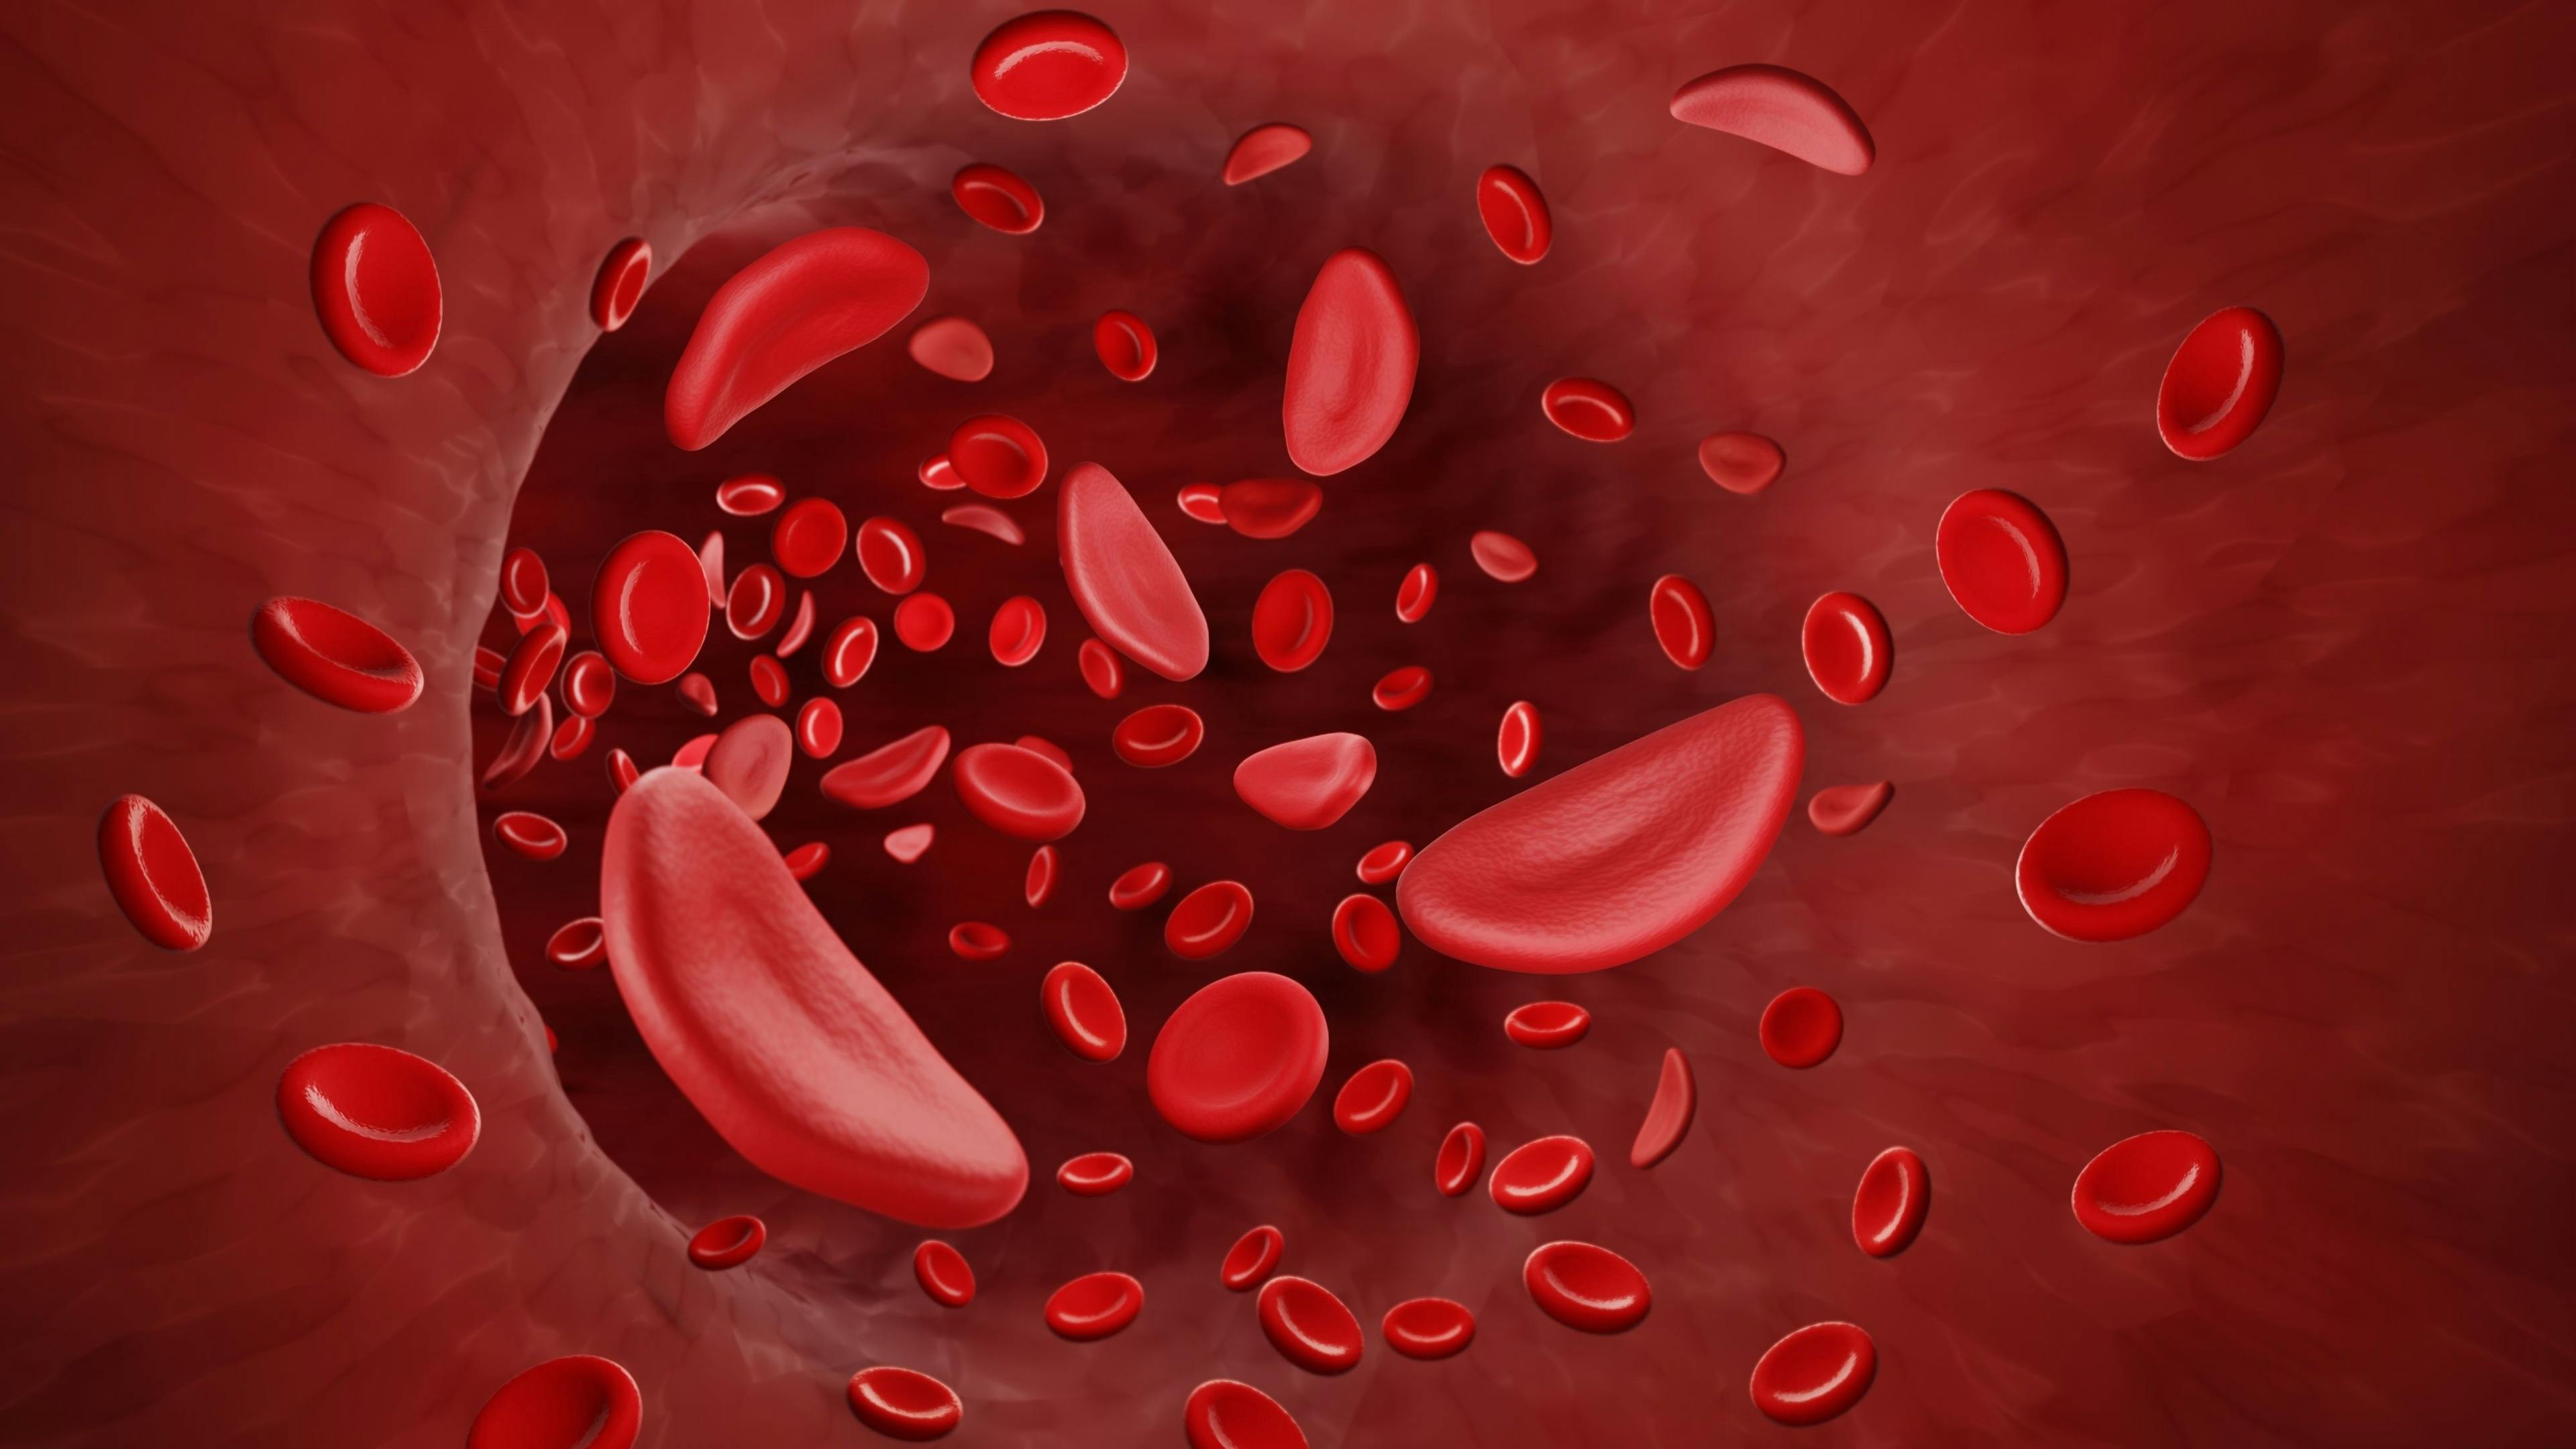 FDA Approves First Gene Therapies for Treatment in Patients With Sickle Cell Disease